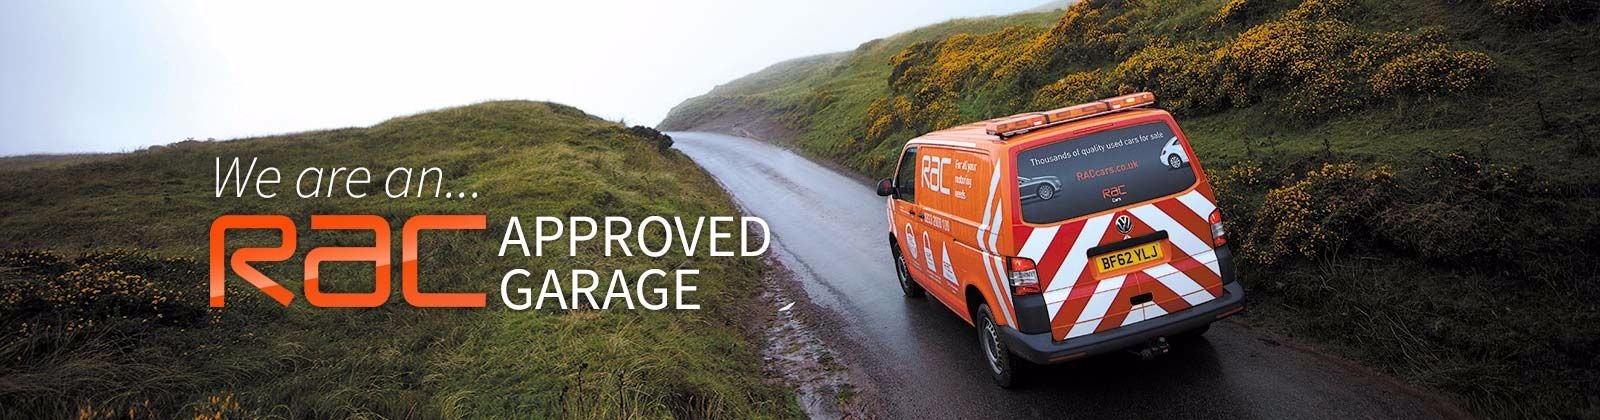 RAC Approved Garage